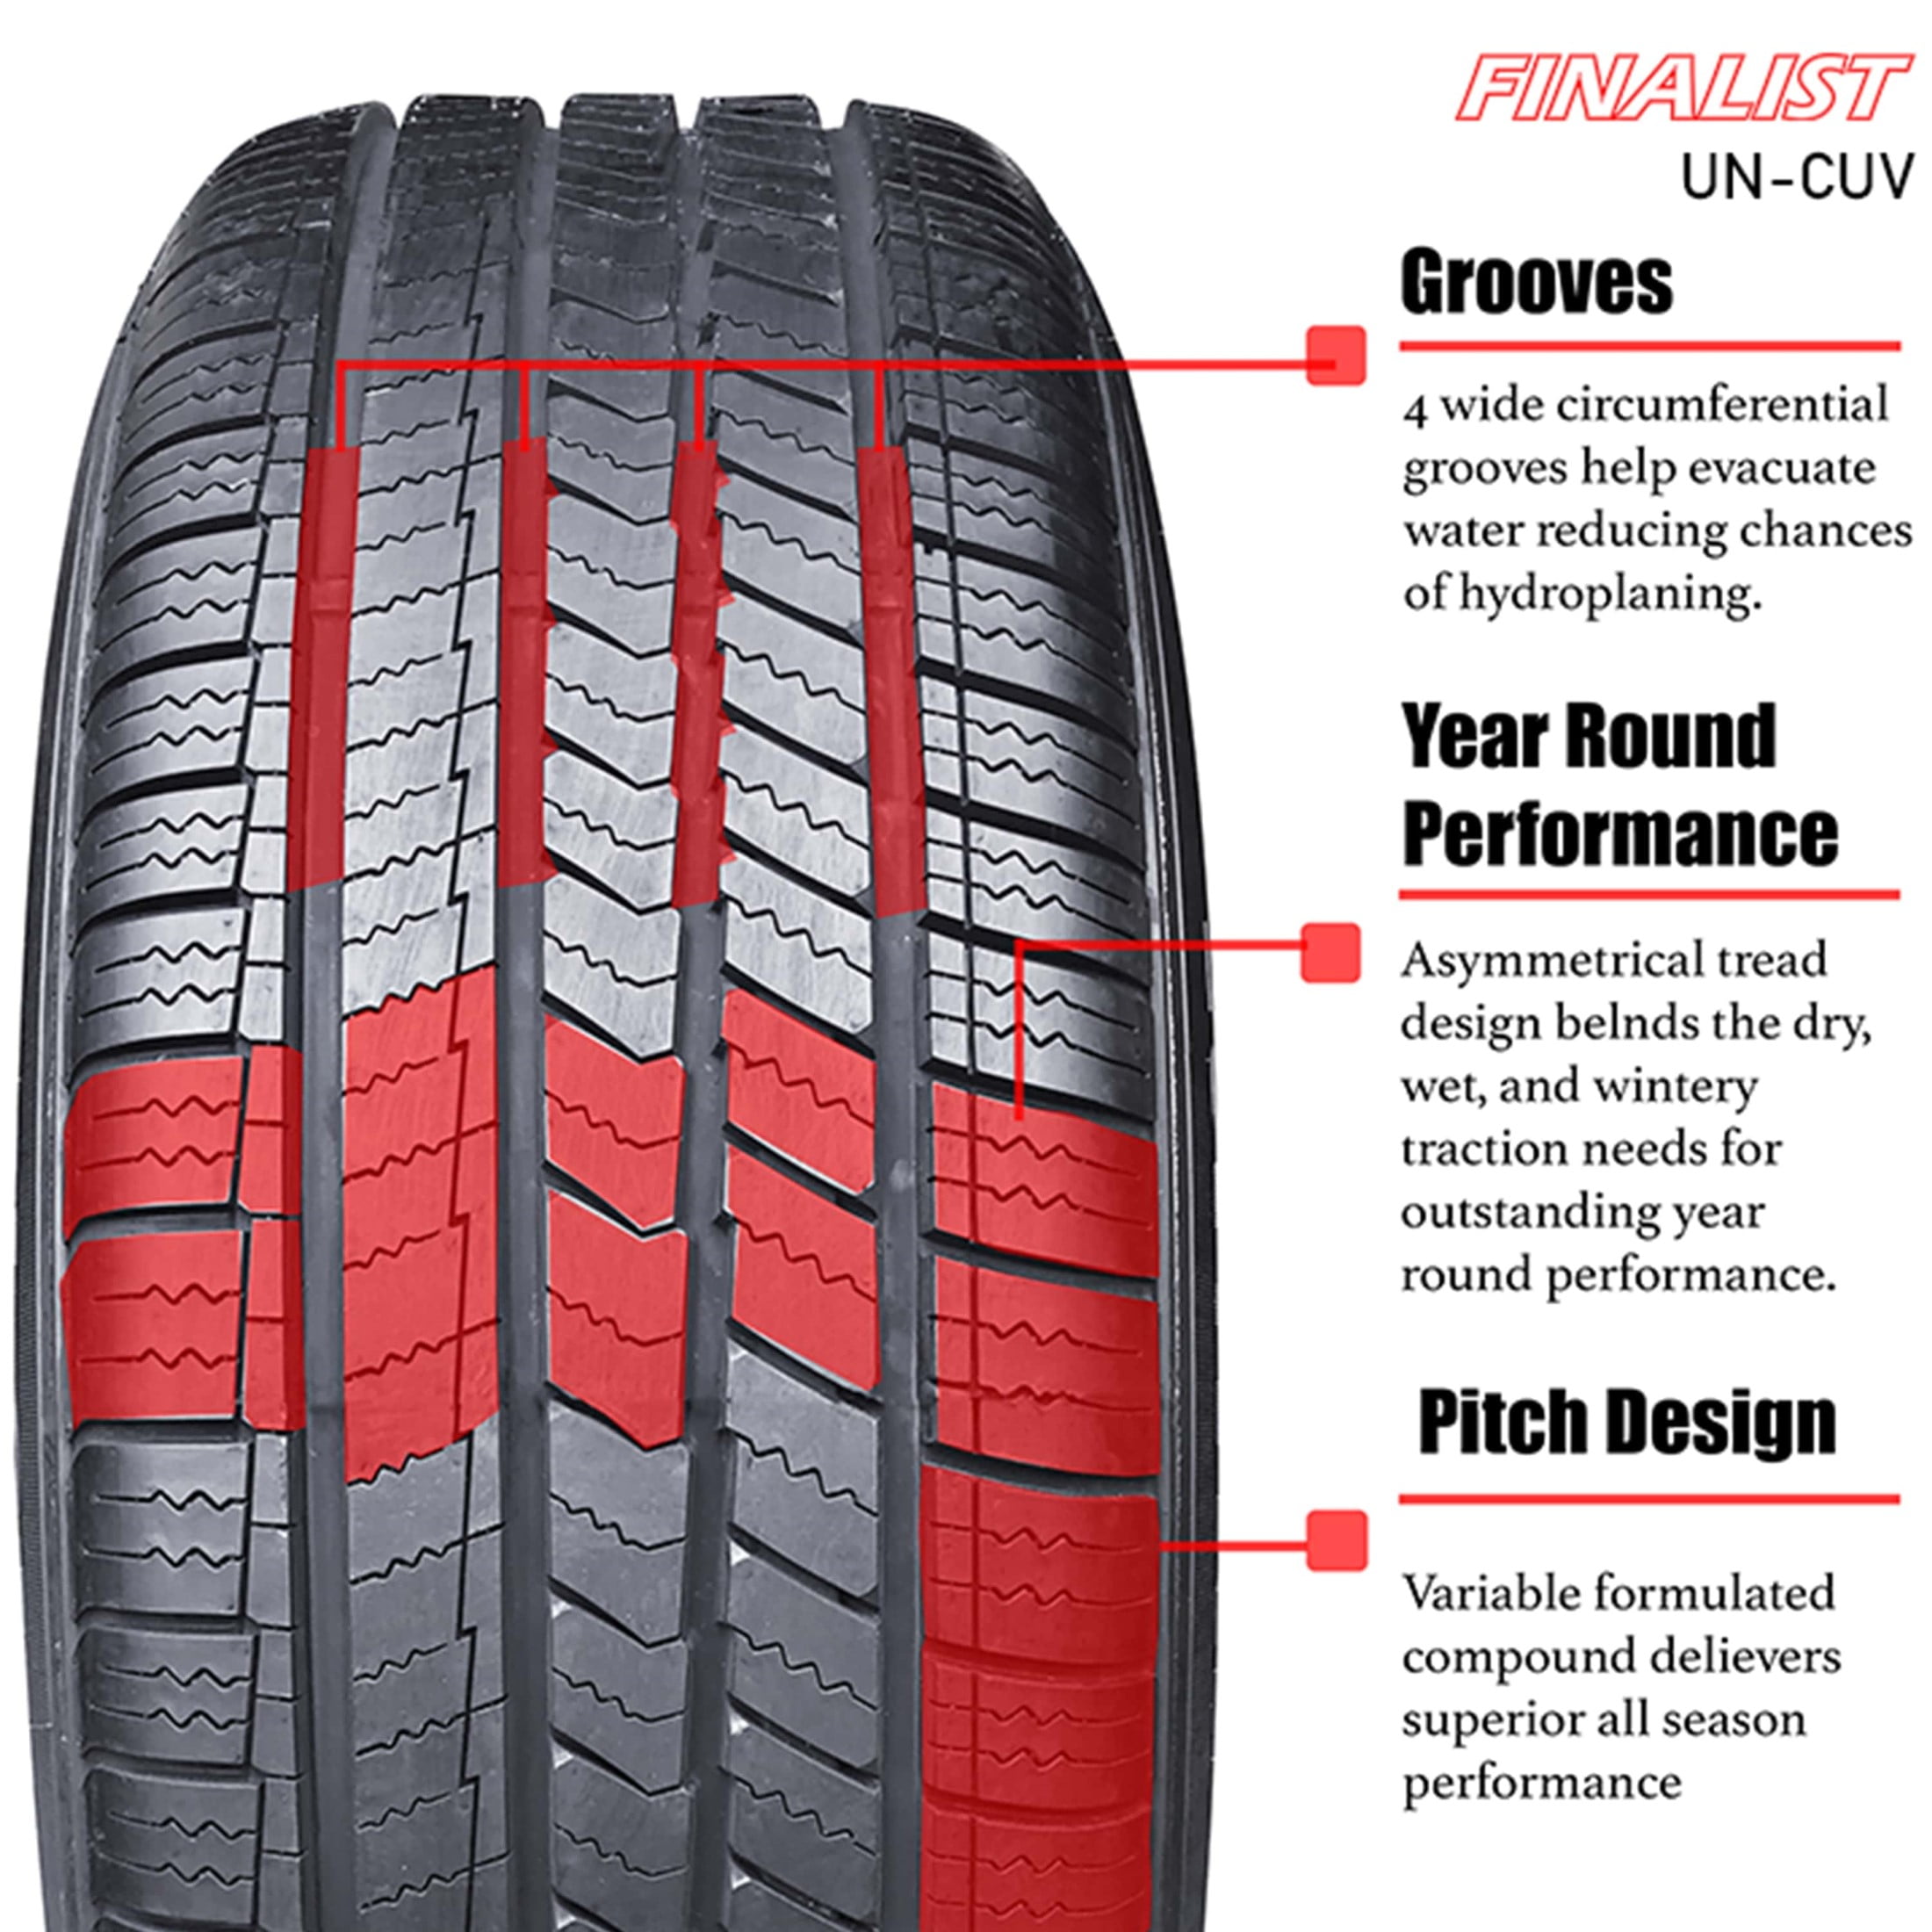 (Tire XL CUV Only) UN-CUV Finalist SUV 235/65R17 235/65/17 All High Load A/S Performance Tire 108V Season Extra